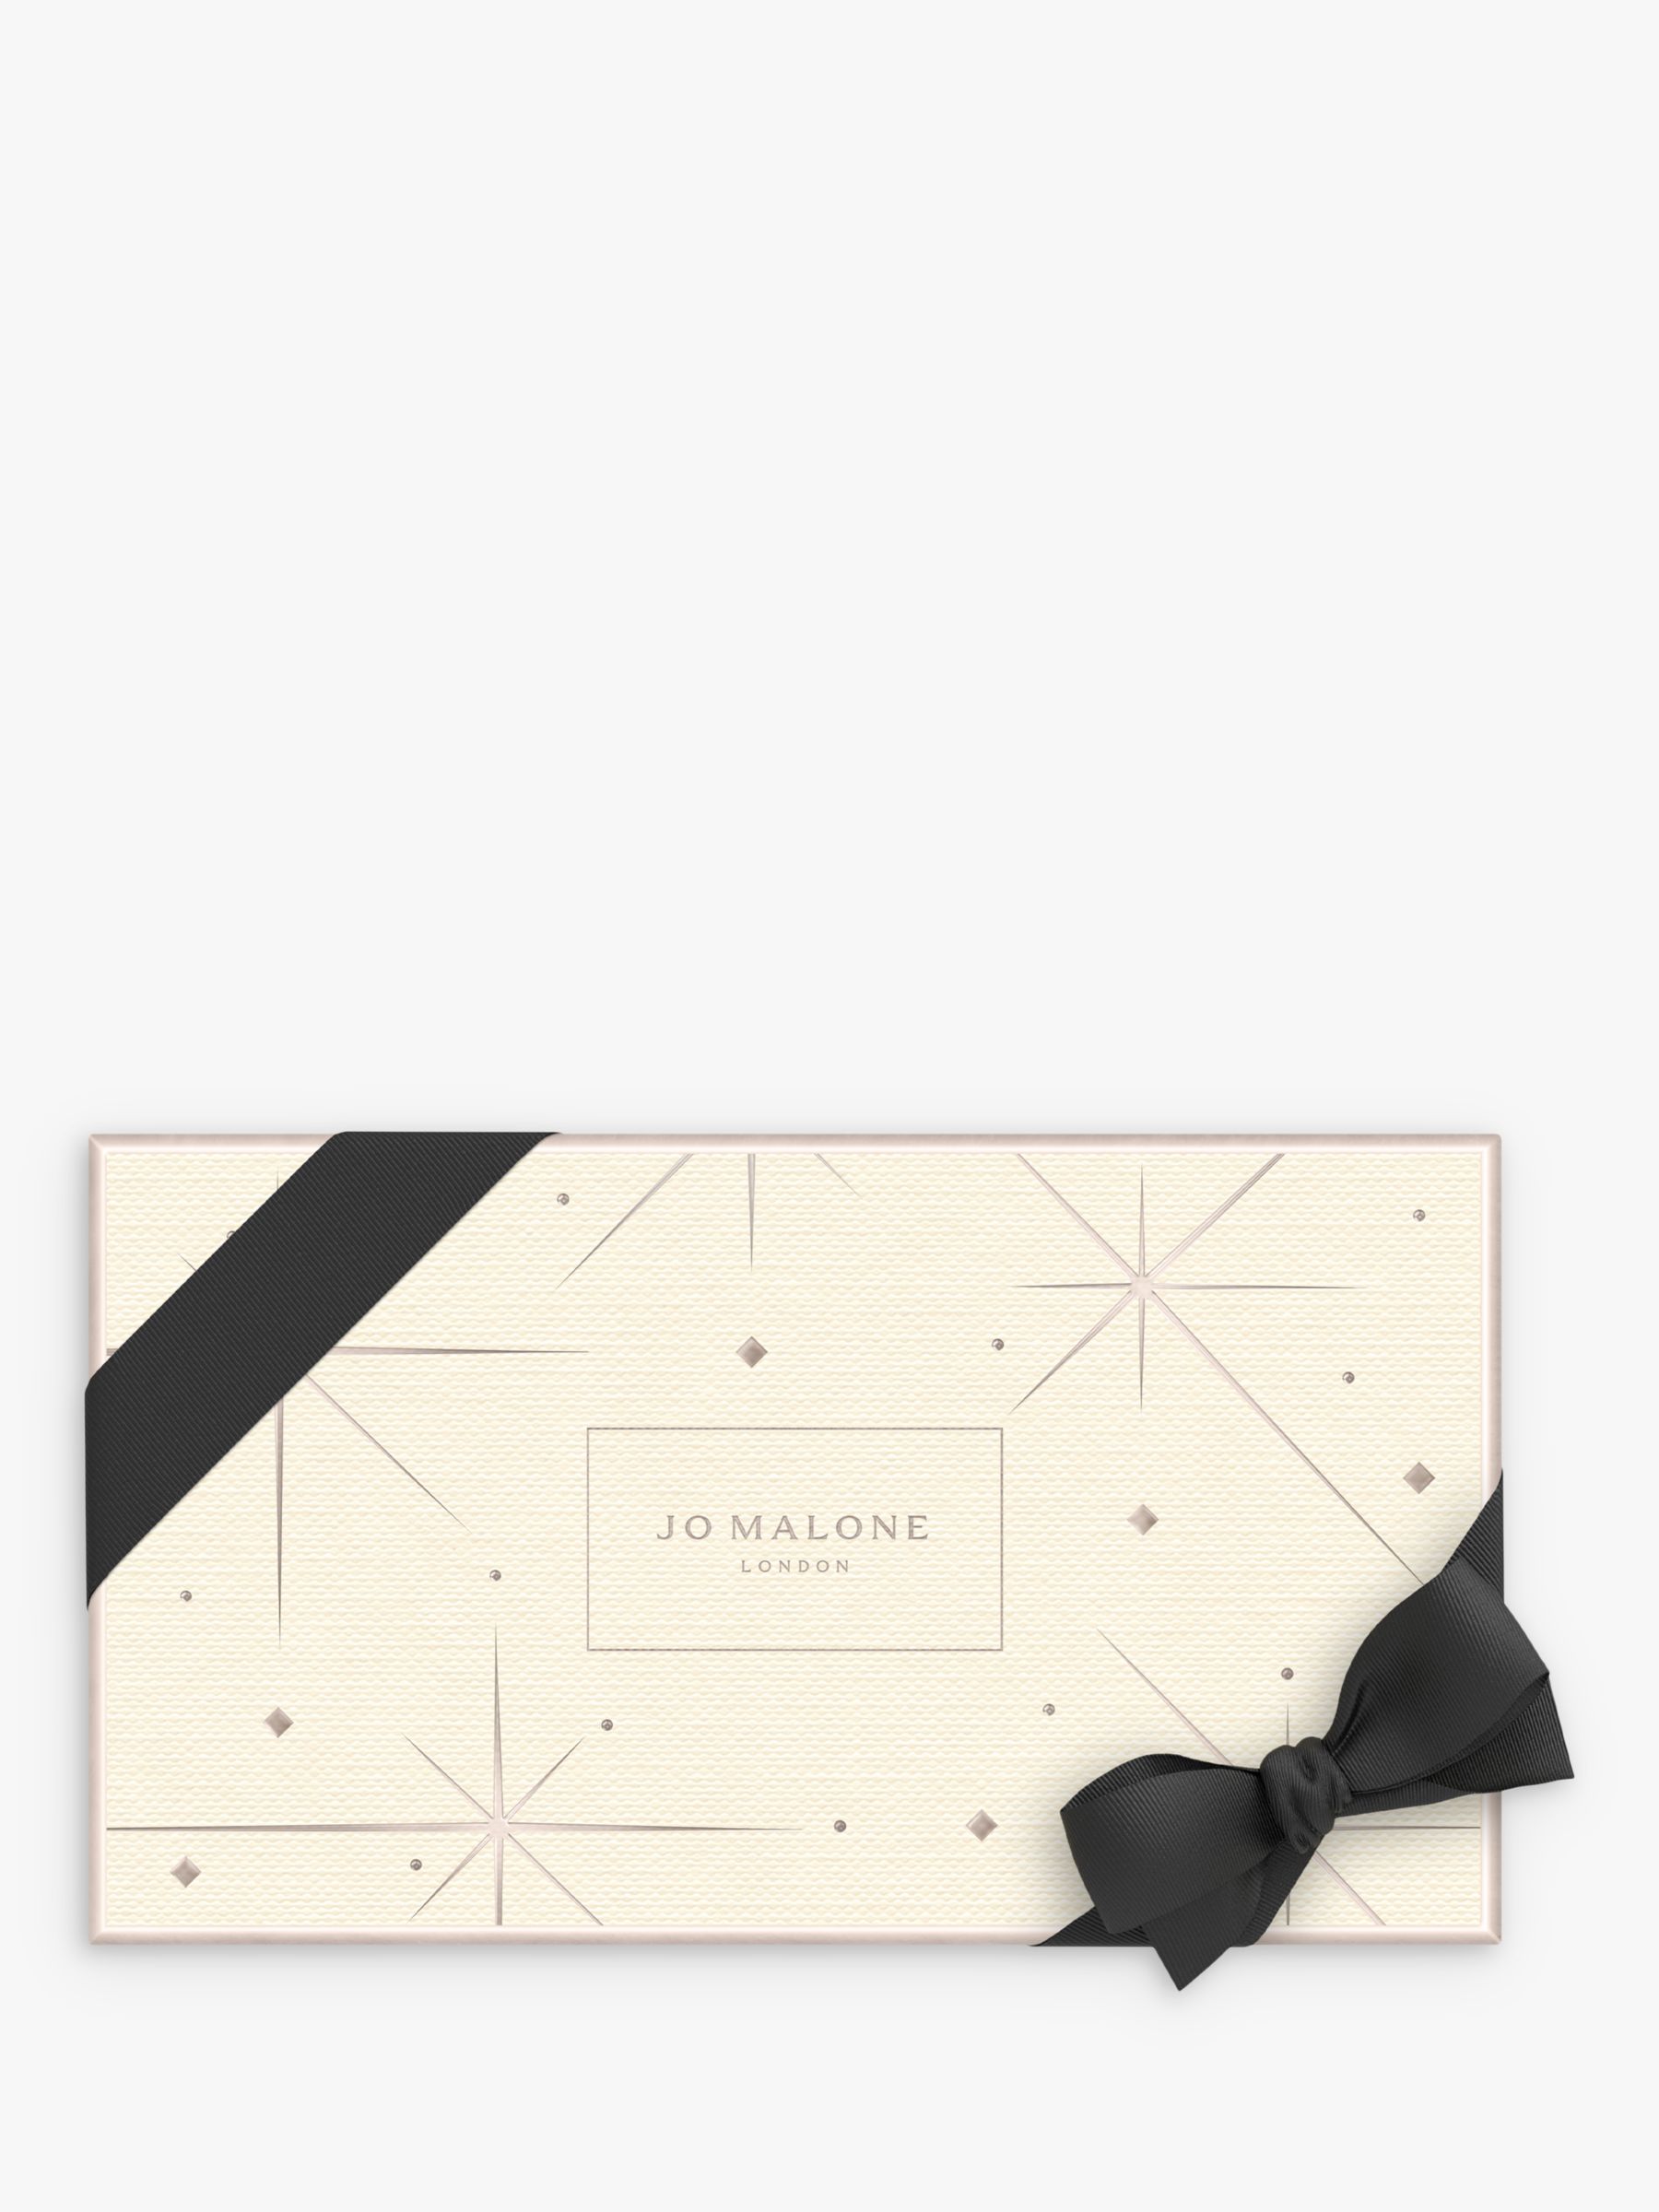 Jo Malone London Cologne Collection Fragrance Gift Set